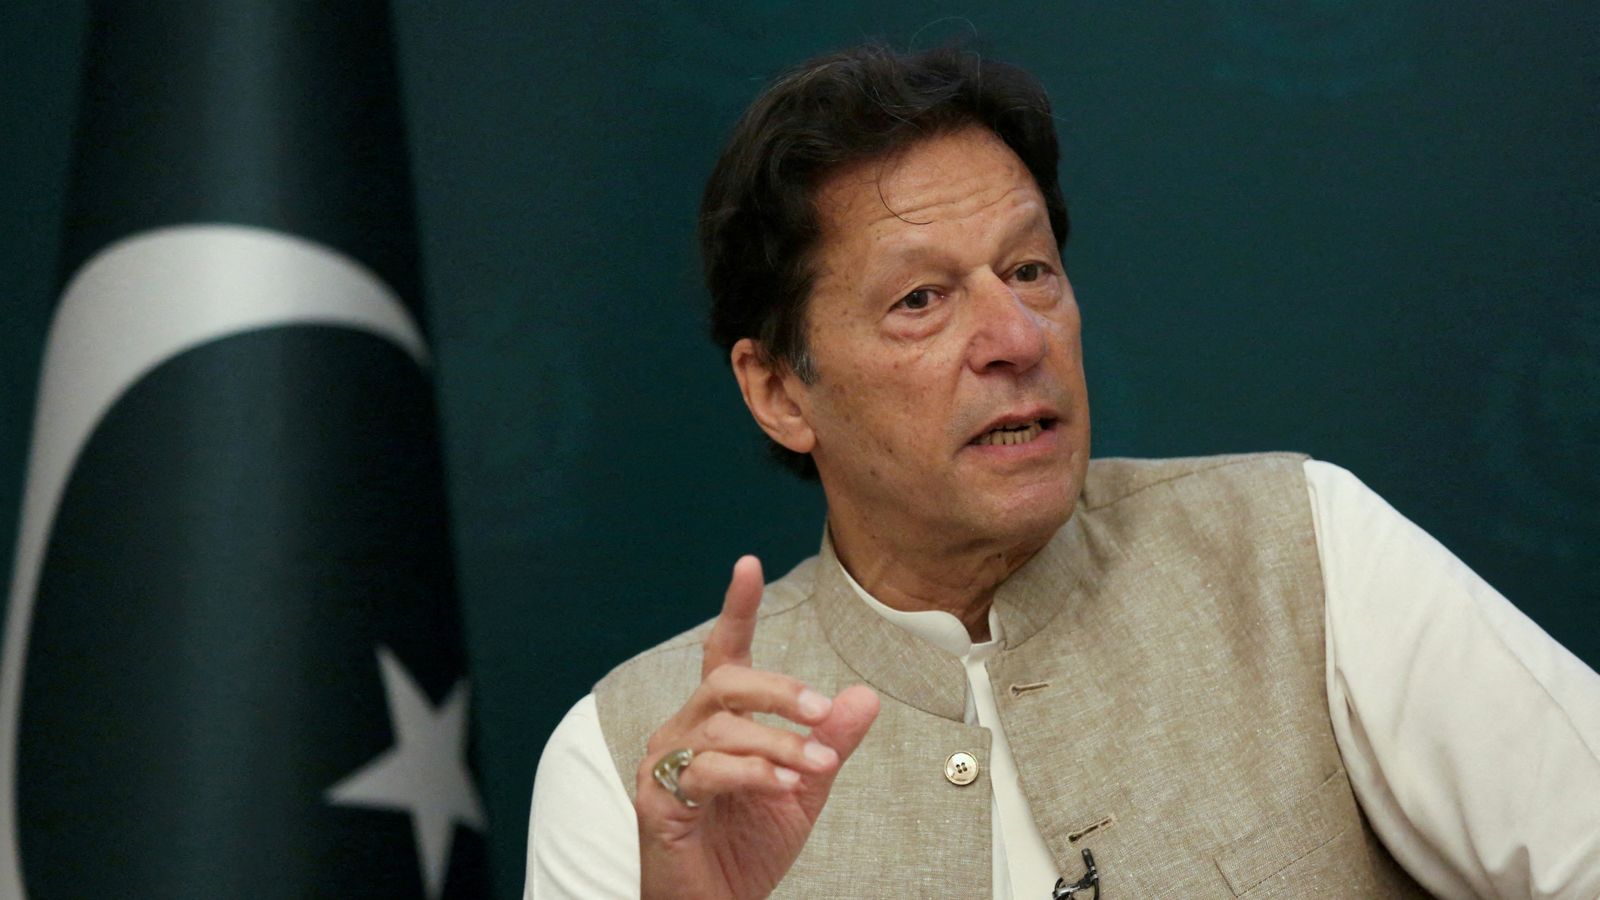 Imran Khan: Pakistani PM fell after losing faith in vote